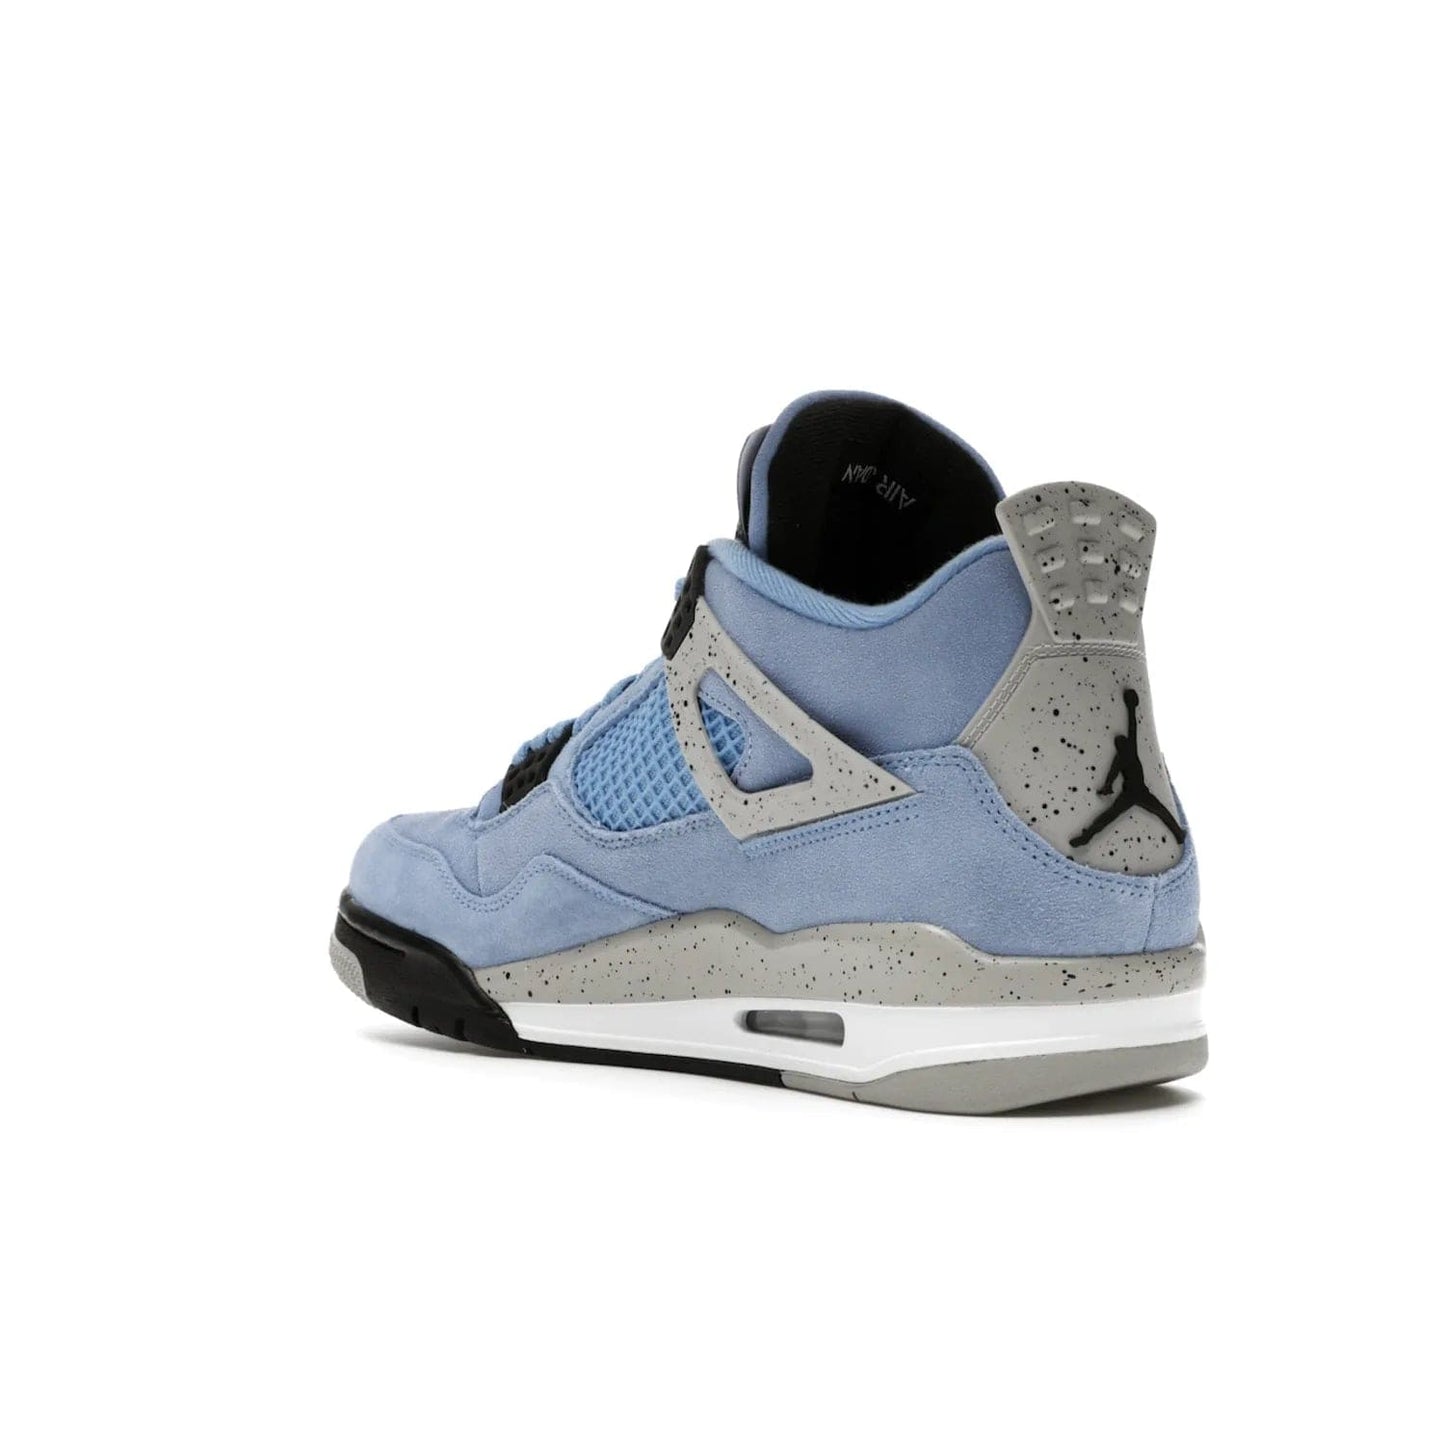 Jordan 4 Retro University Blue - Image 24 - Only at www.BallersClubKickz.com - The Air Jordan 4 University Blue honors MJ's alma mater. Rich University Blue suede, panels of netting, and Cement Grey speckled eyelets give this design an edgy look. Features a black, white and Tech Grey sole with a clear Air unit and two woven labels on the tongue. Jumpman logo & Team Jordan jock tag included. Released April 2021.